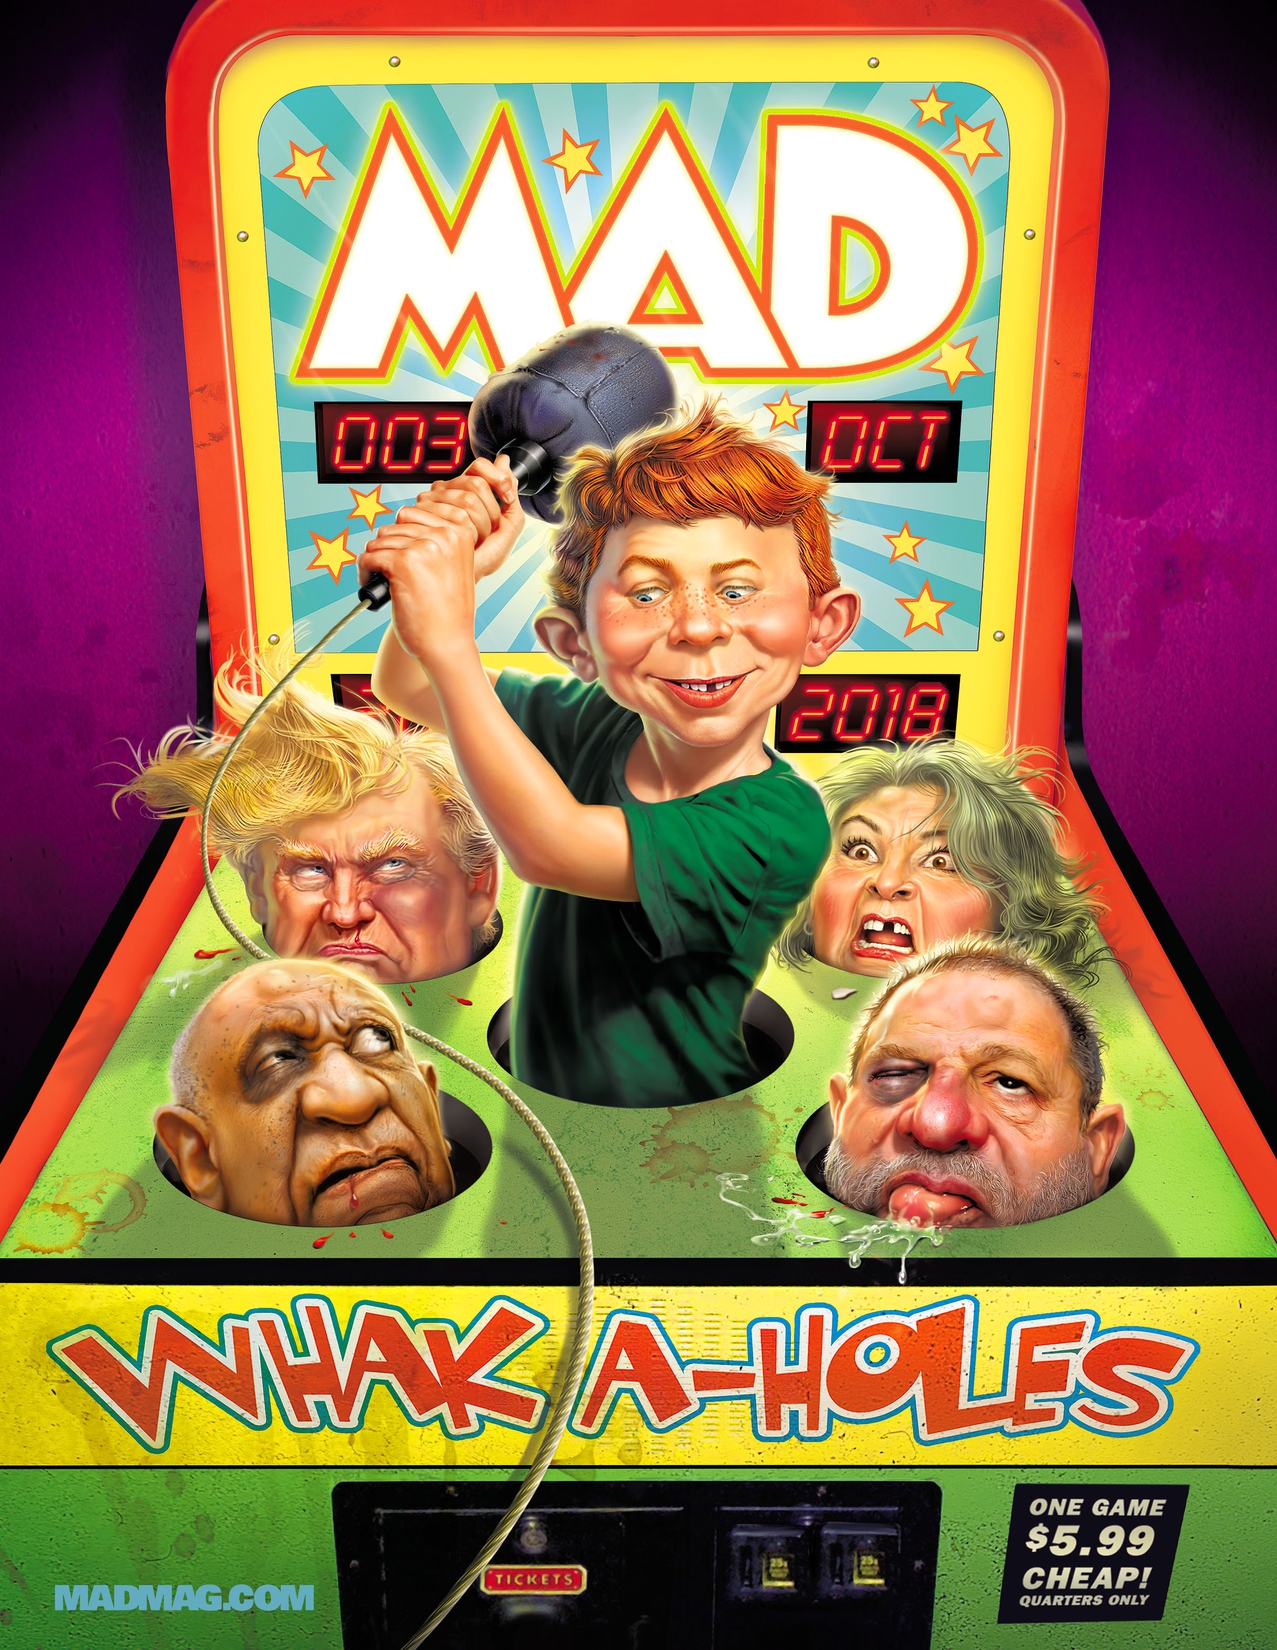 MAD Magazine (2018-) #3 preview images